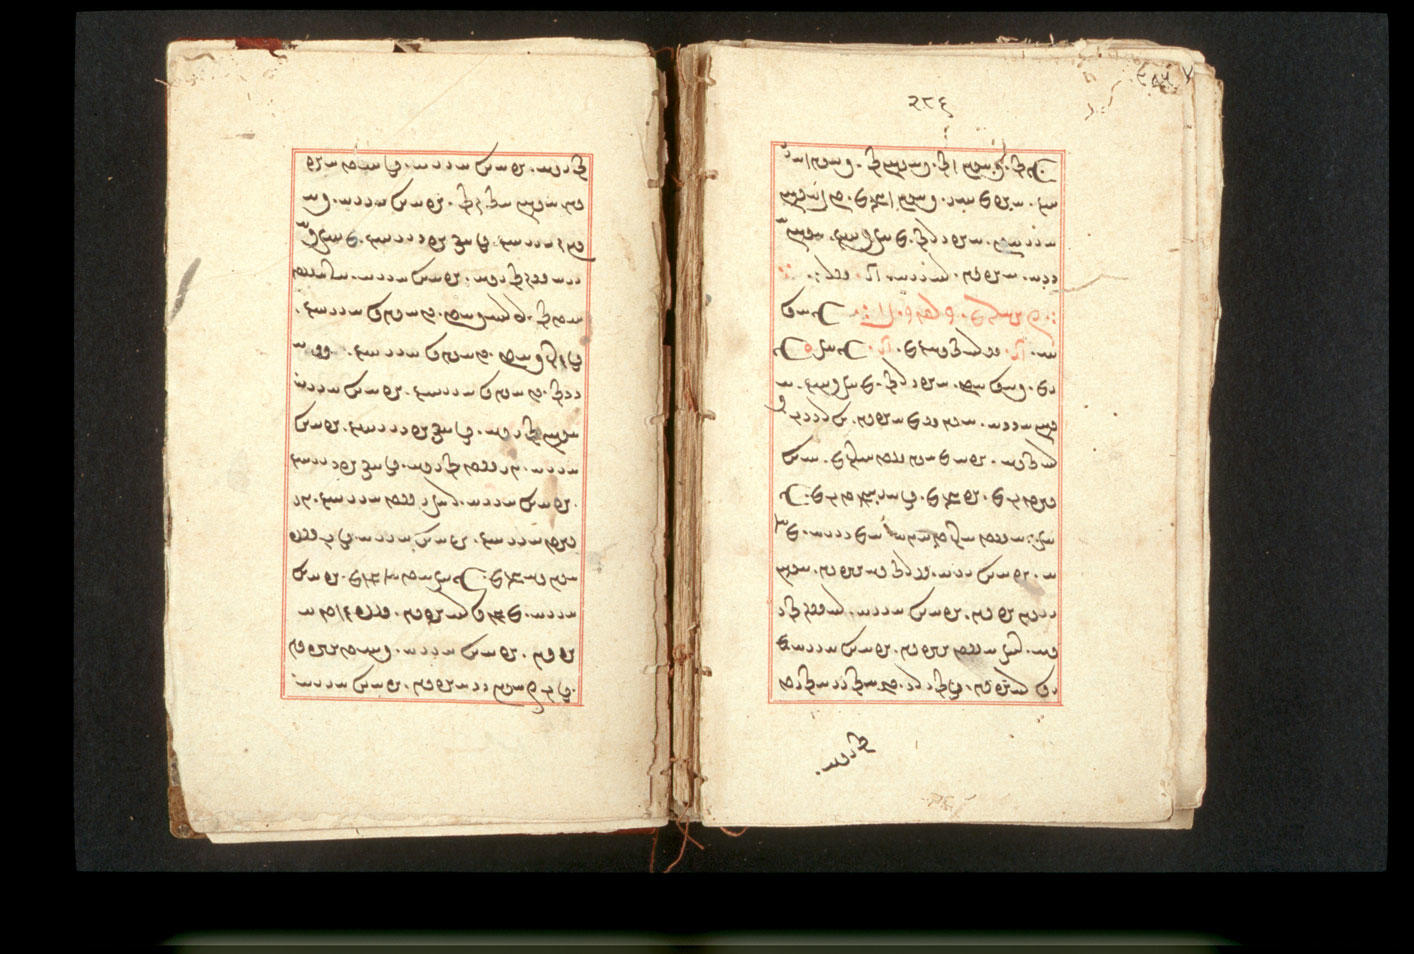 Folios 286v (right) and 287r (left)